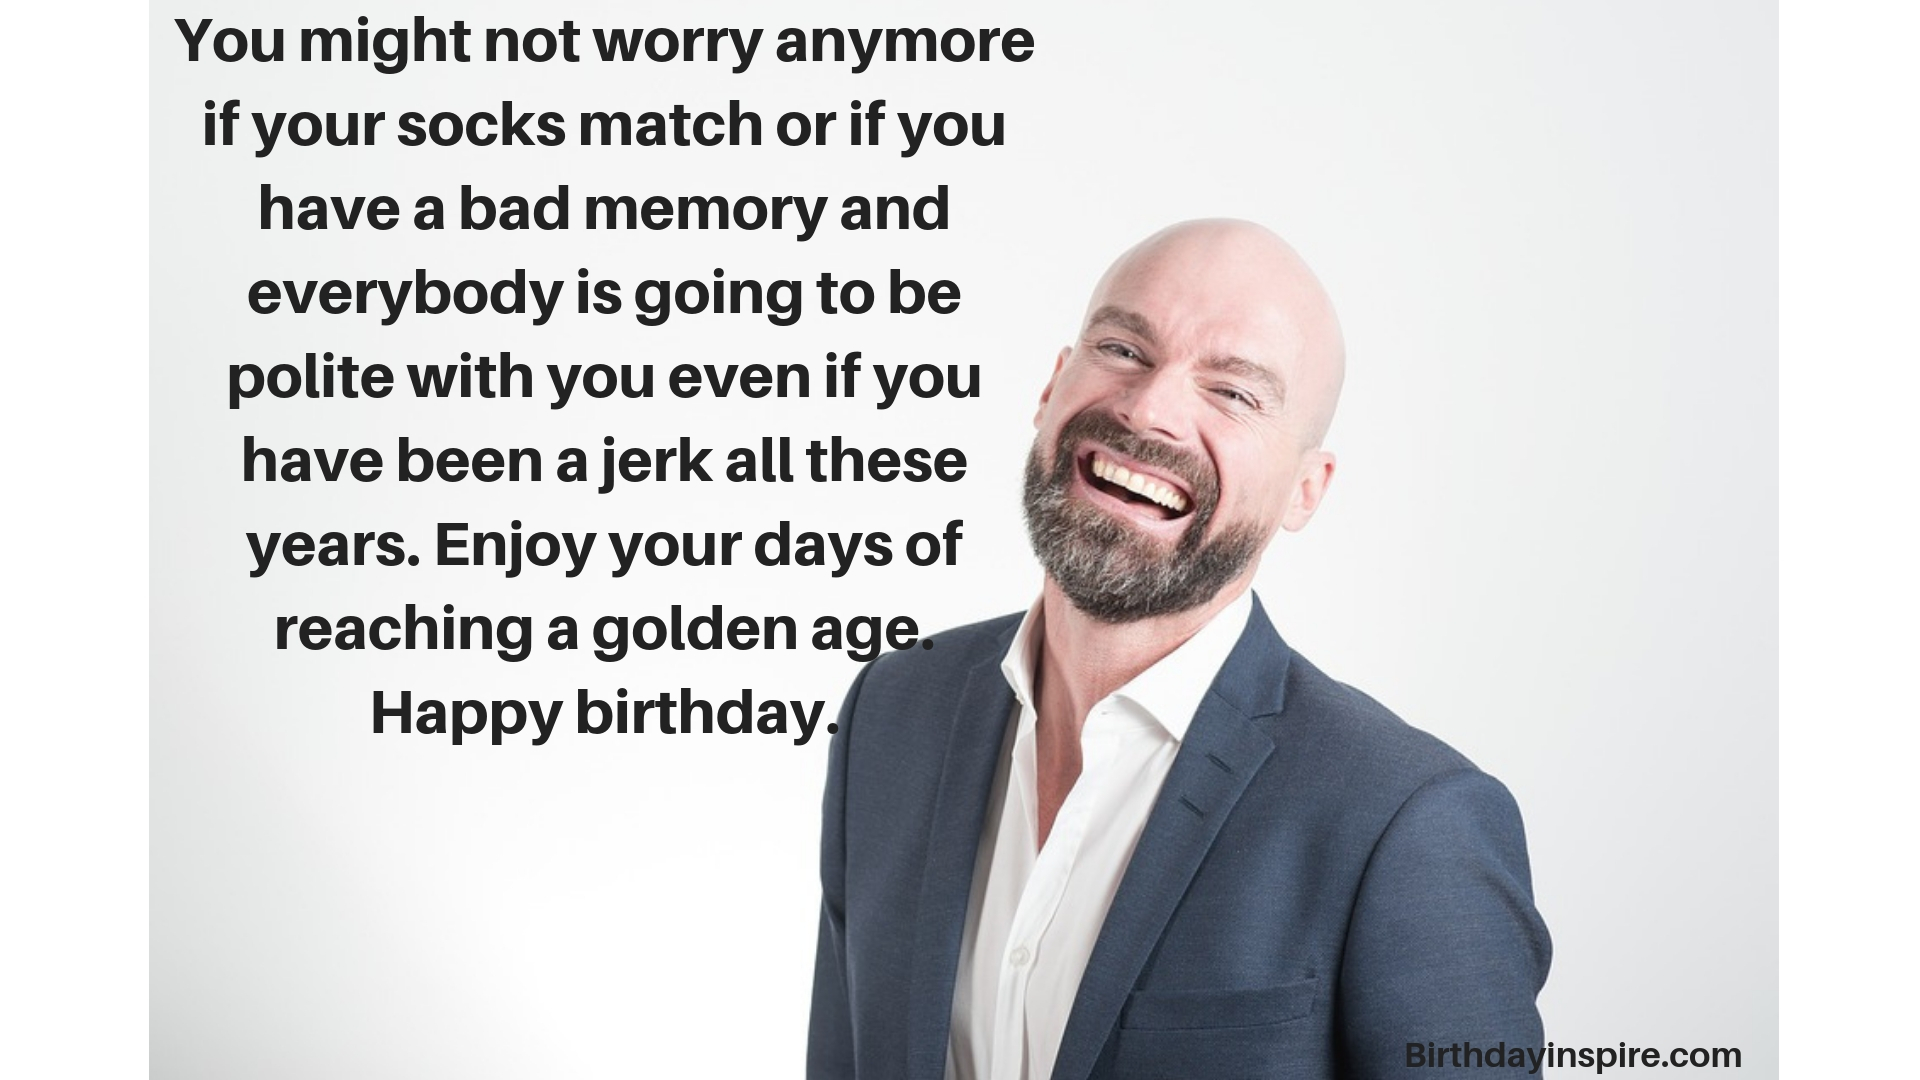 45 Hilarious 50th Birthday Quotes For Men - Birthday Inspire